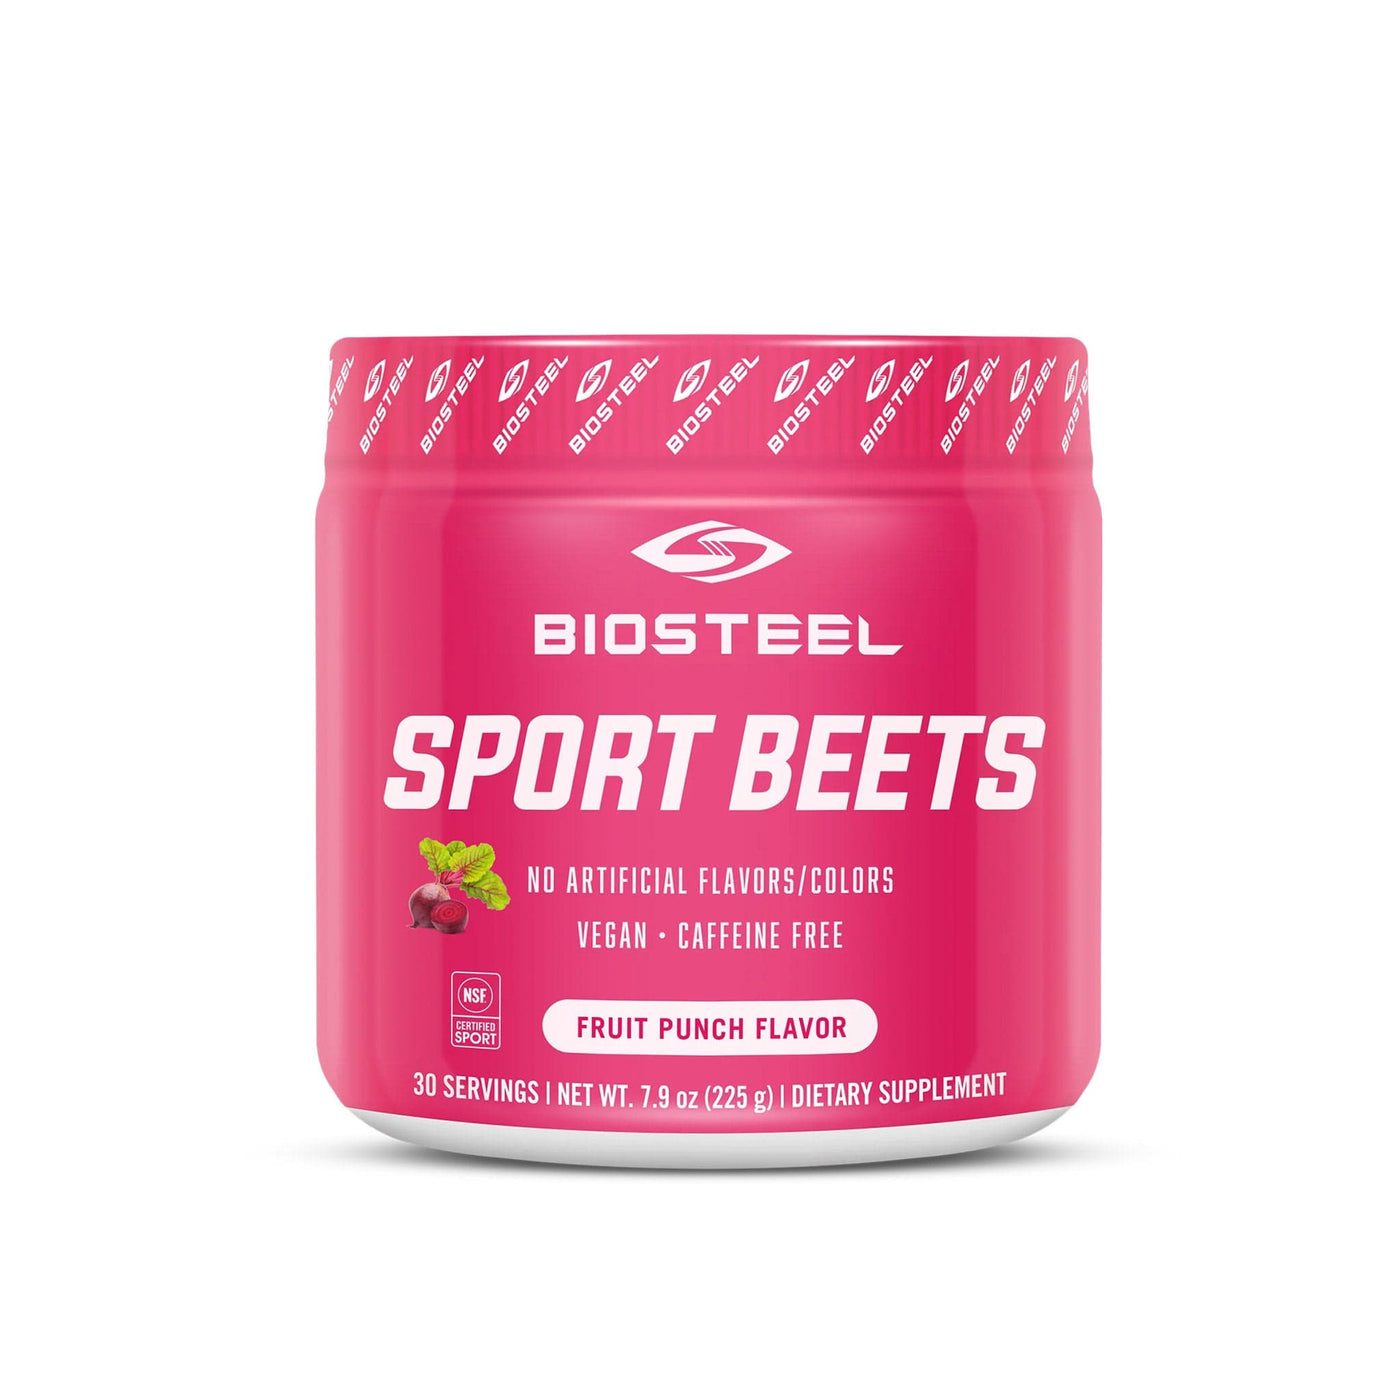 BioSteel Sports Beats Pre-Workout - Fruit Punch - The Hockey Shop Source For Sports